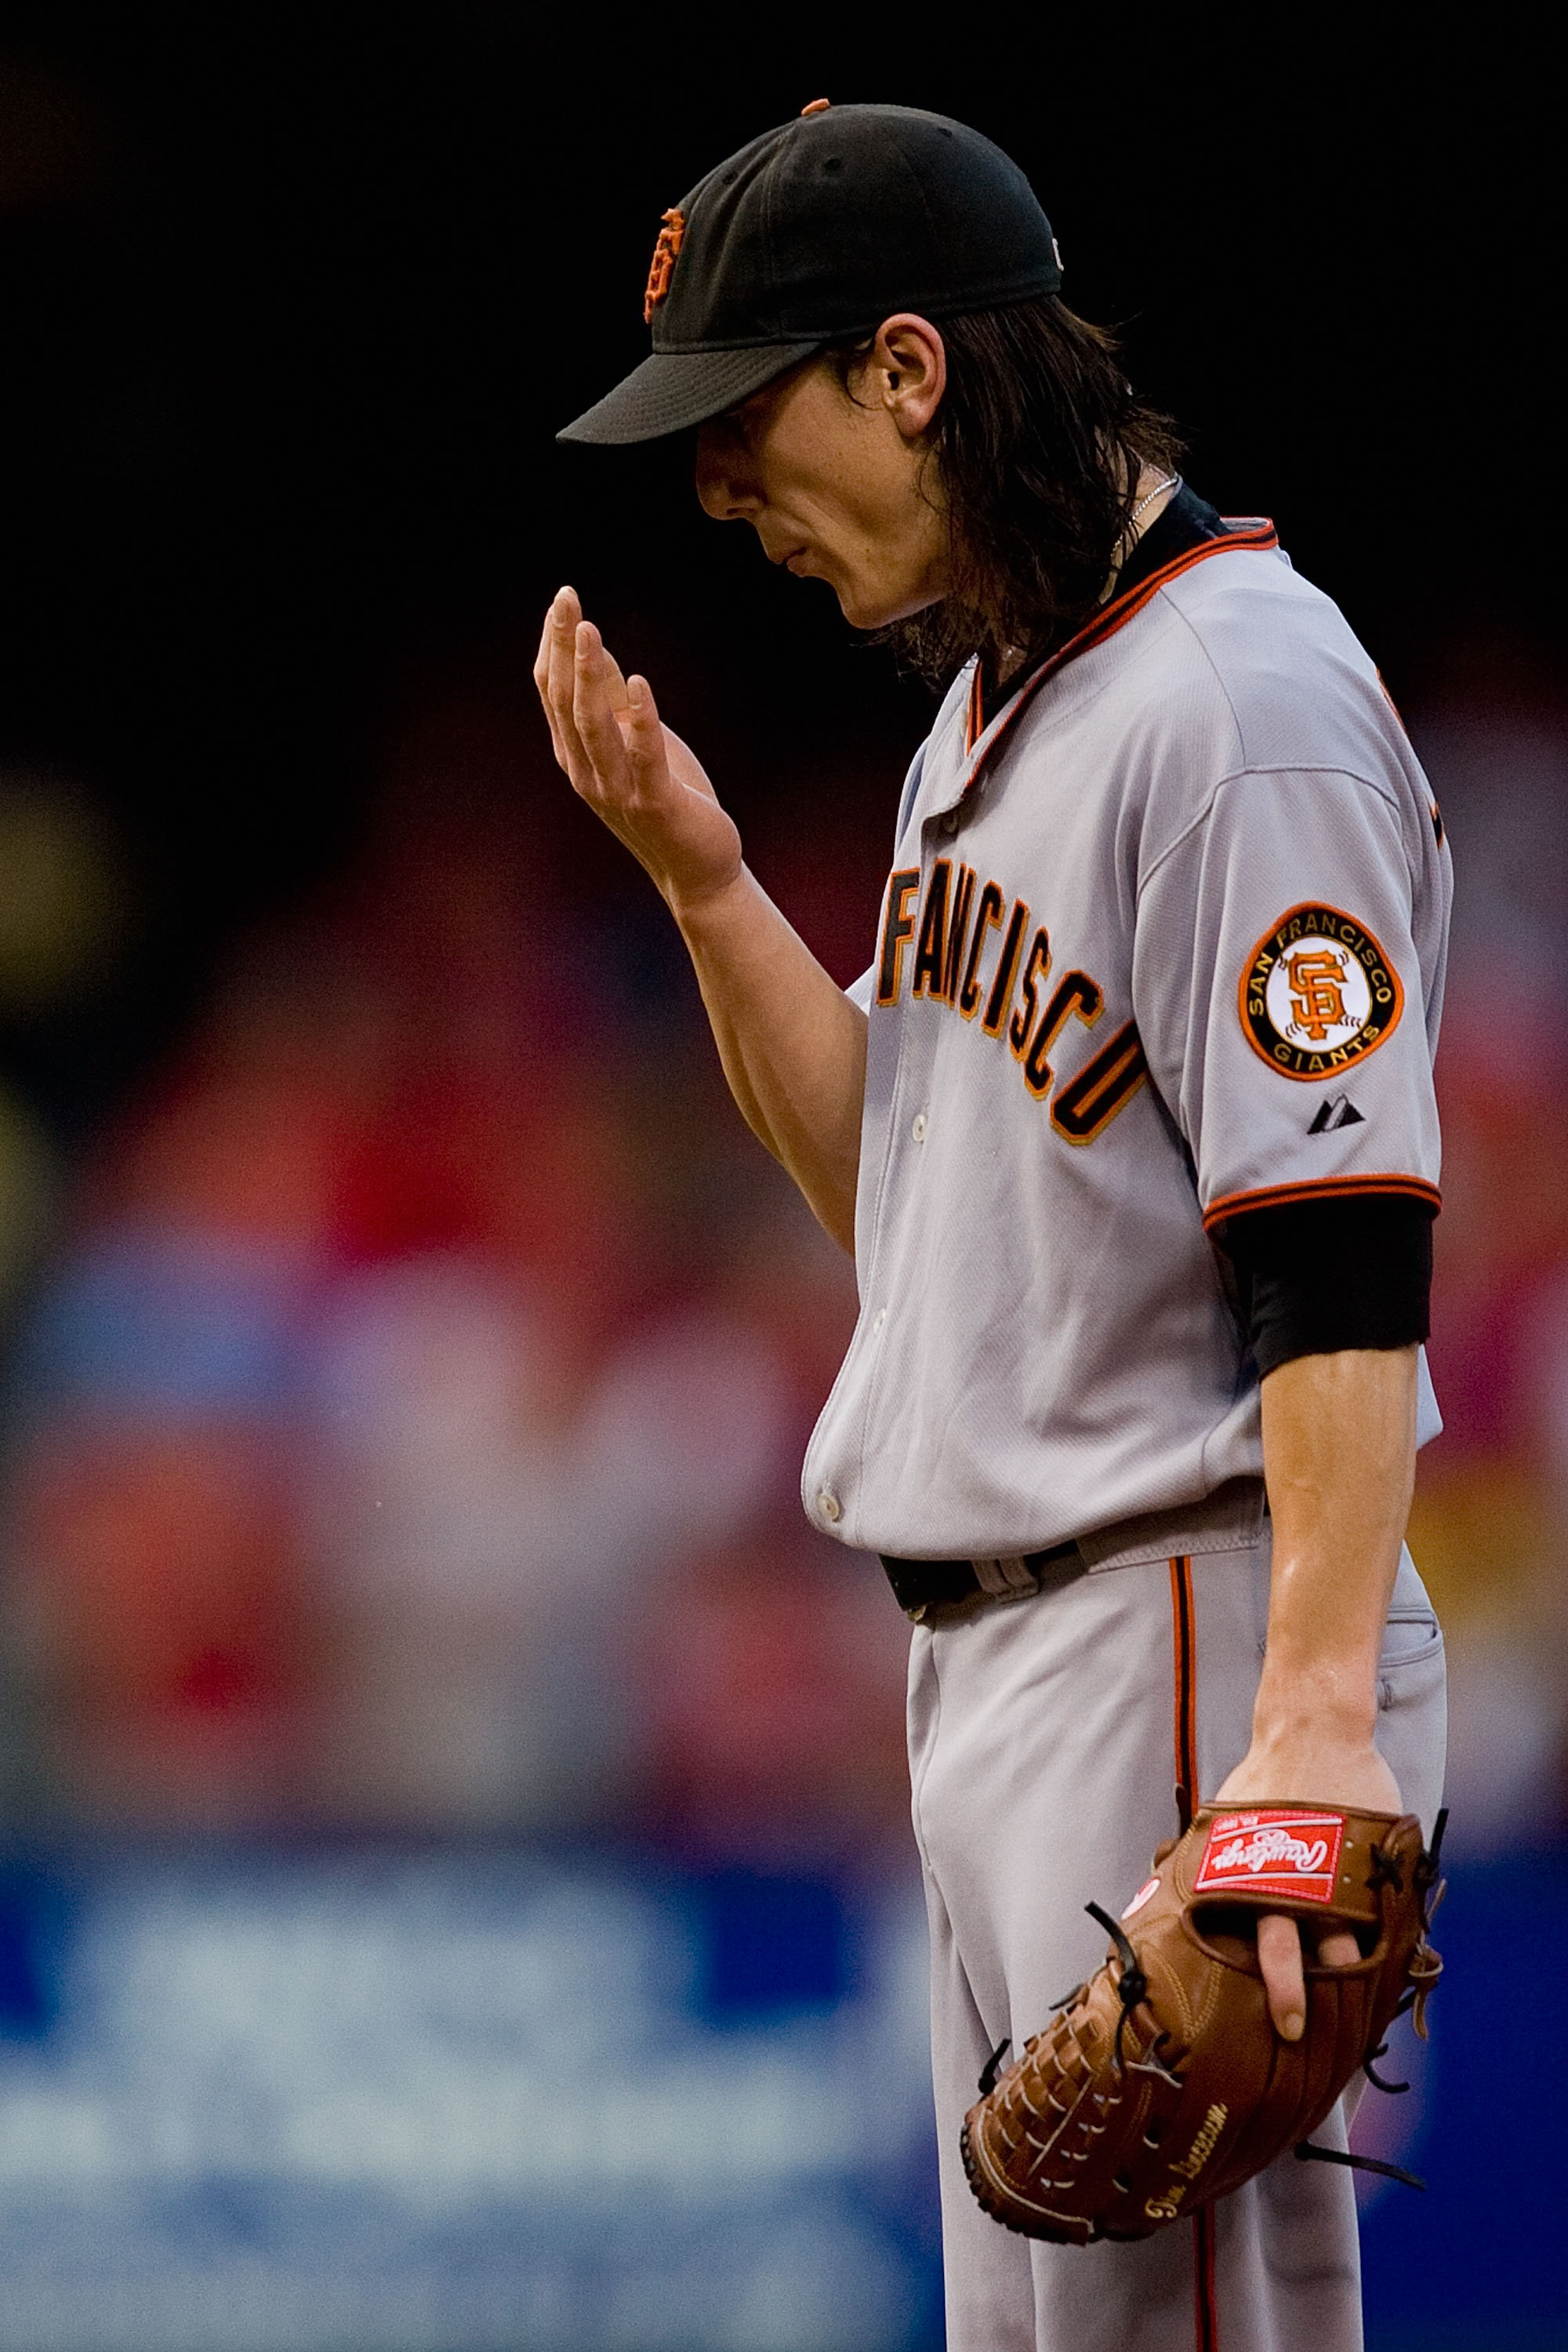 ST. LOUIS - AUGUST 21: Starter Tim Lincecum #55 of the San Francisco Giants reacts to giving up a home run against the St. Louis Cardinals at Busch Stadium on August 21, 2010 in St. Louis, Missouri.  (Photo by Dilip Vishwanat/Getty Images)